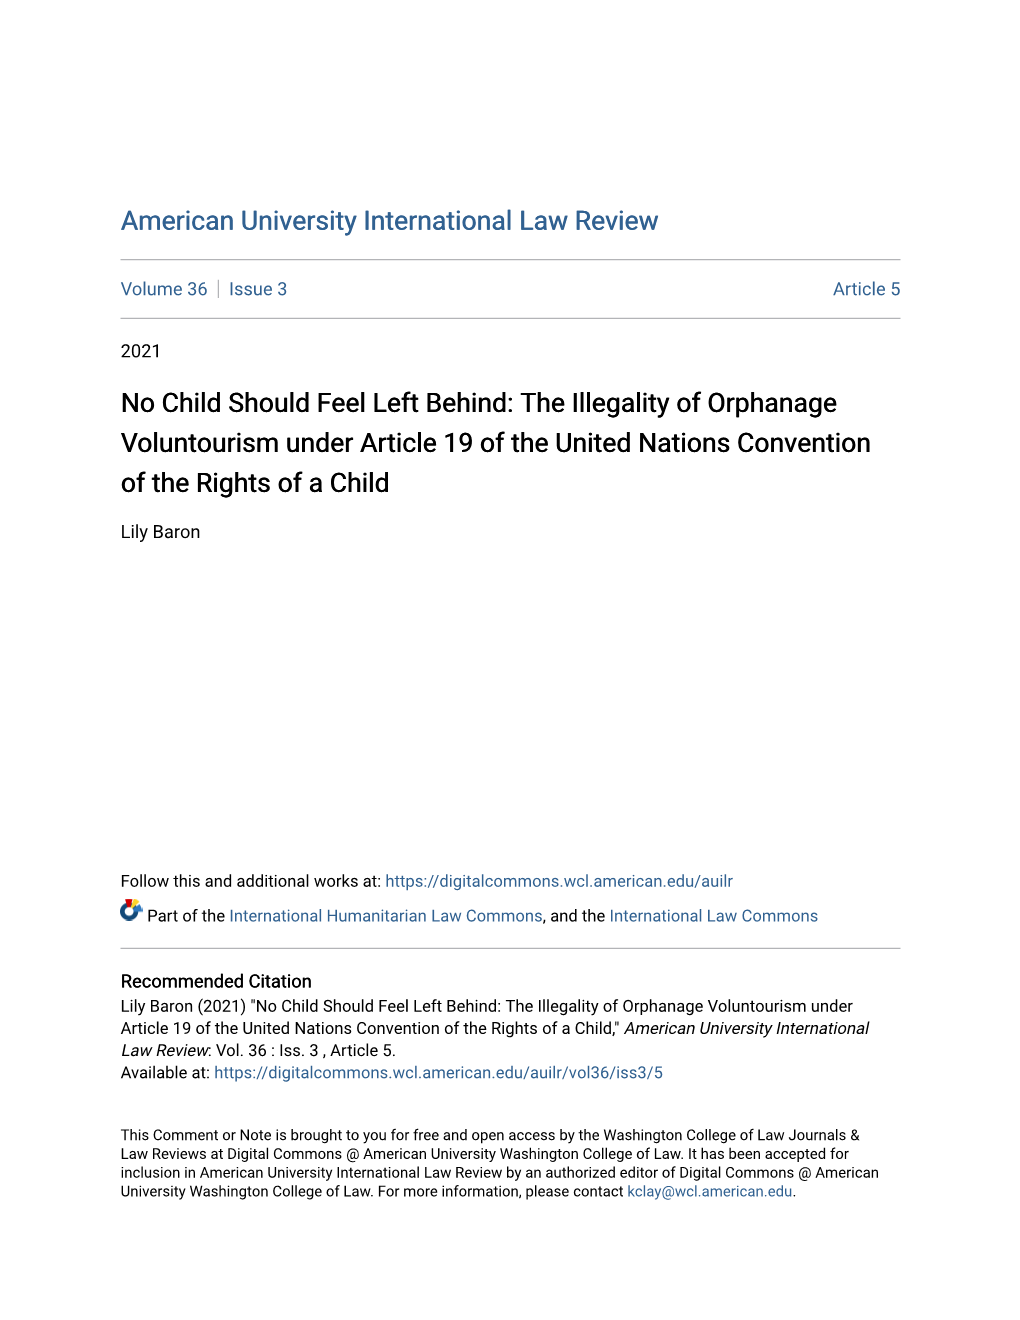 No Child Should Feel Left Behind: the Illegality of Orphanage Voluntourism Under Article 19 of the United Nations Convention of the Rights of a Child